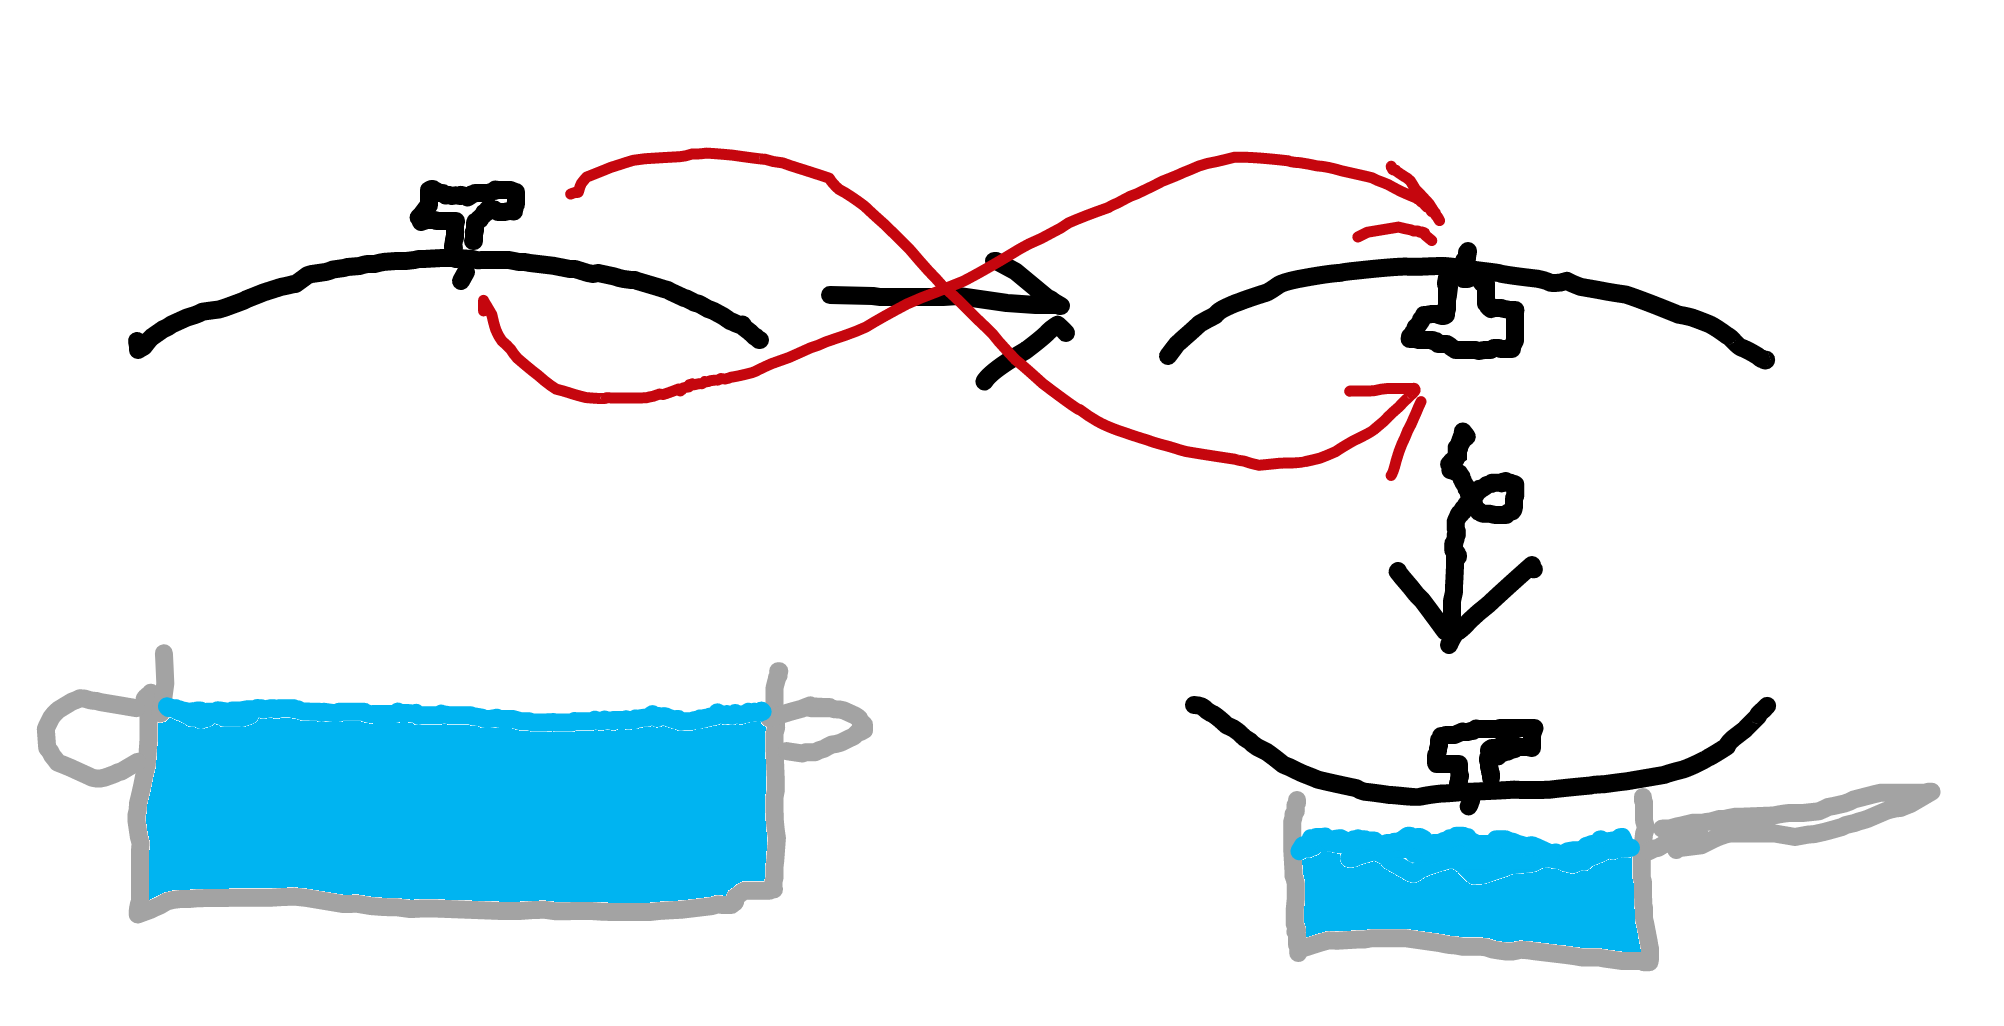 basic drawing of the concept described